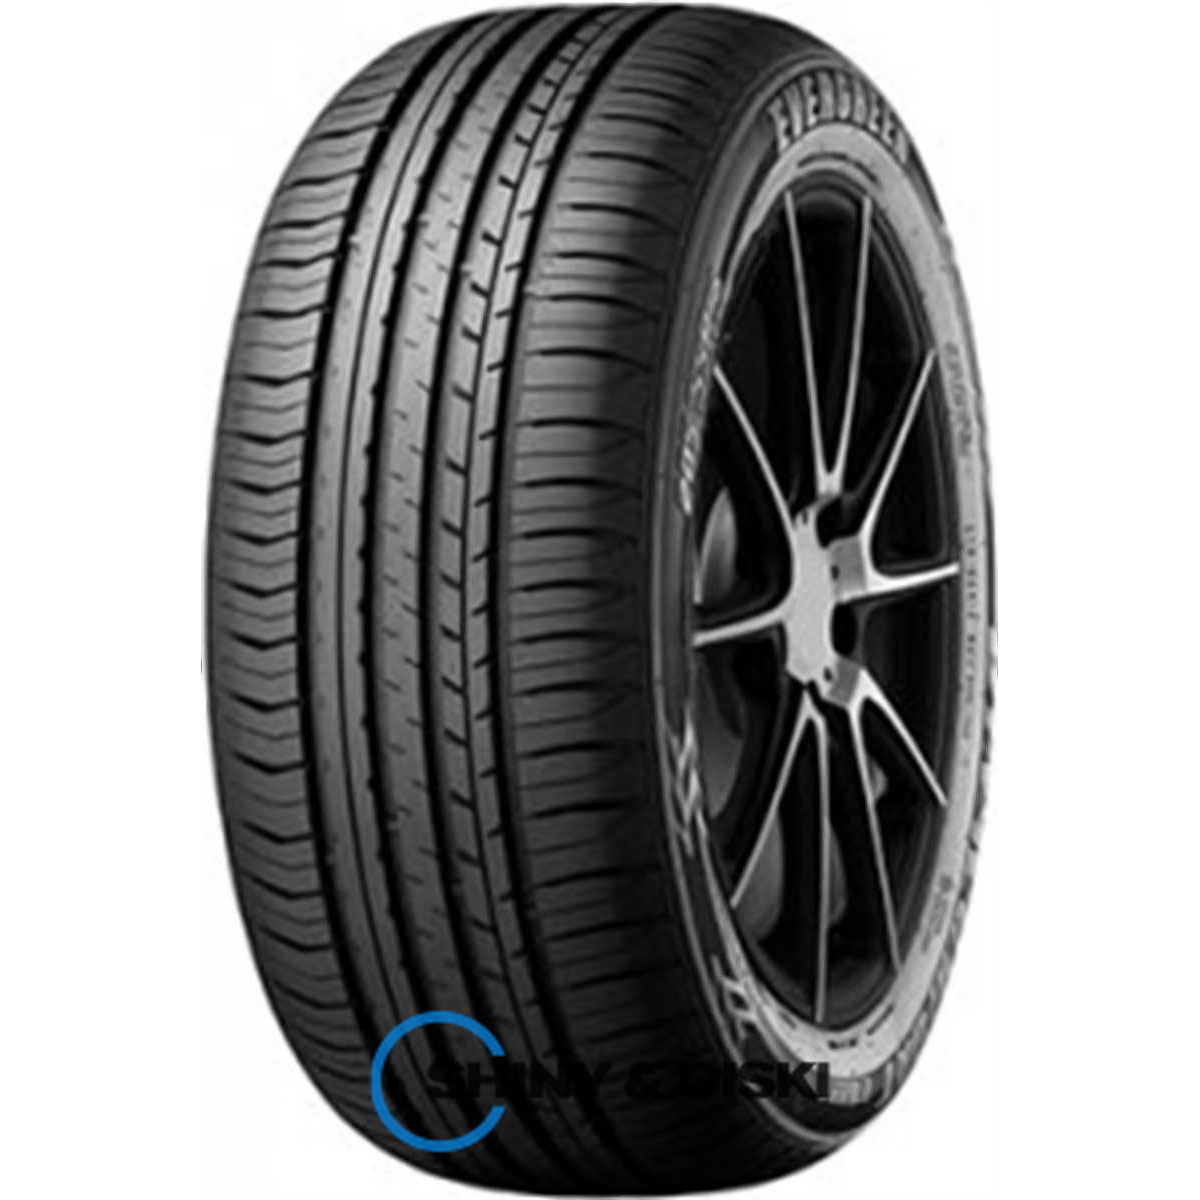 evergreen eh226 175/70 r14 88t